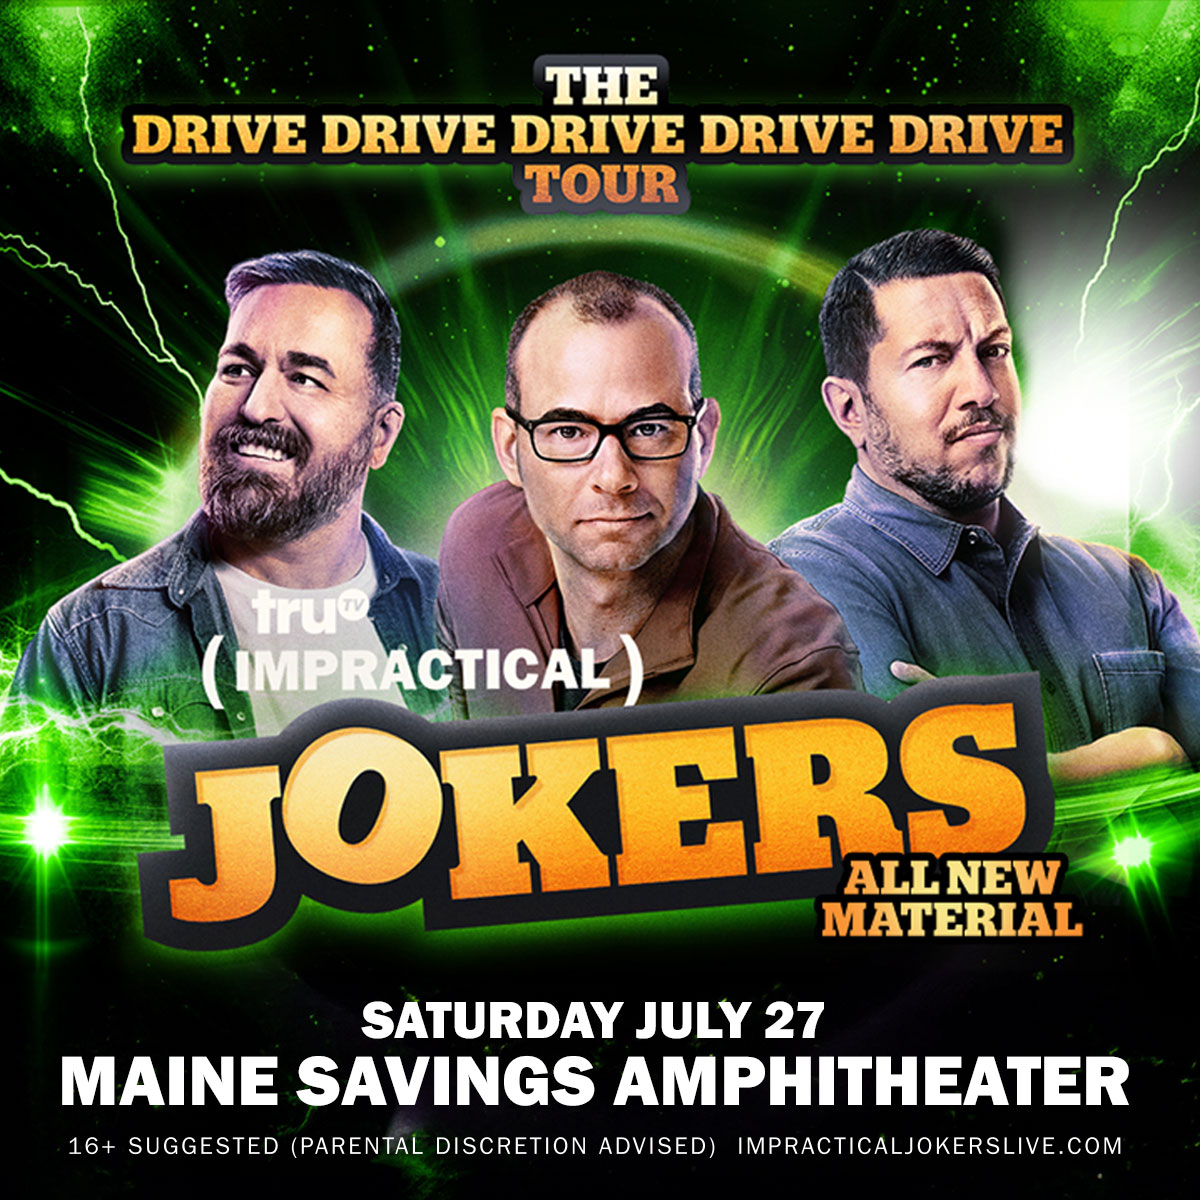 Win tickets to see Impractical Jokers at Maine Savings Ampitheater